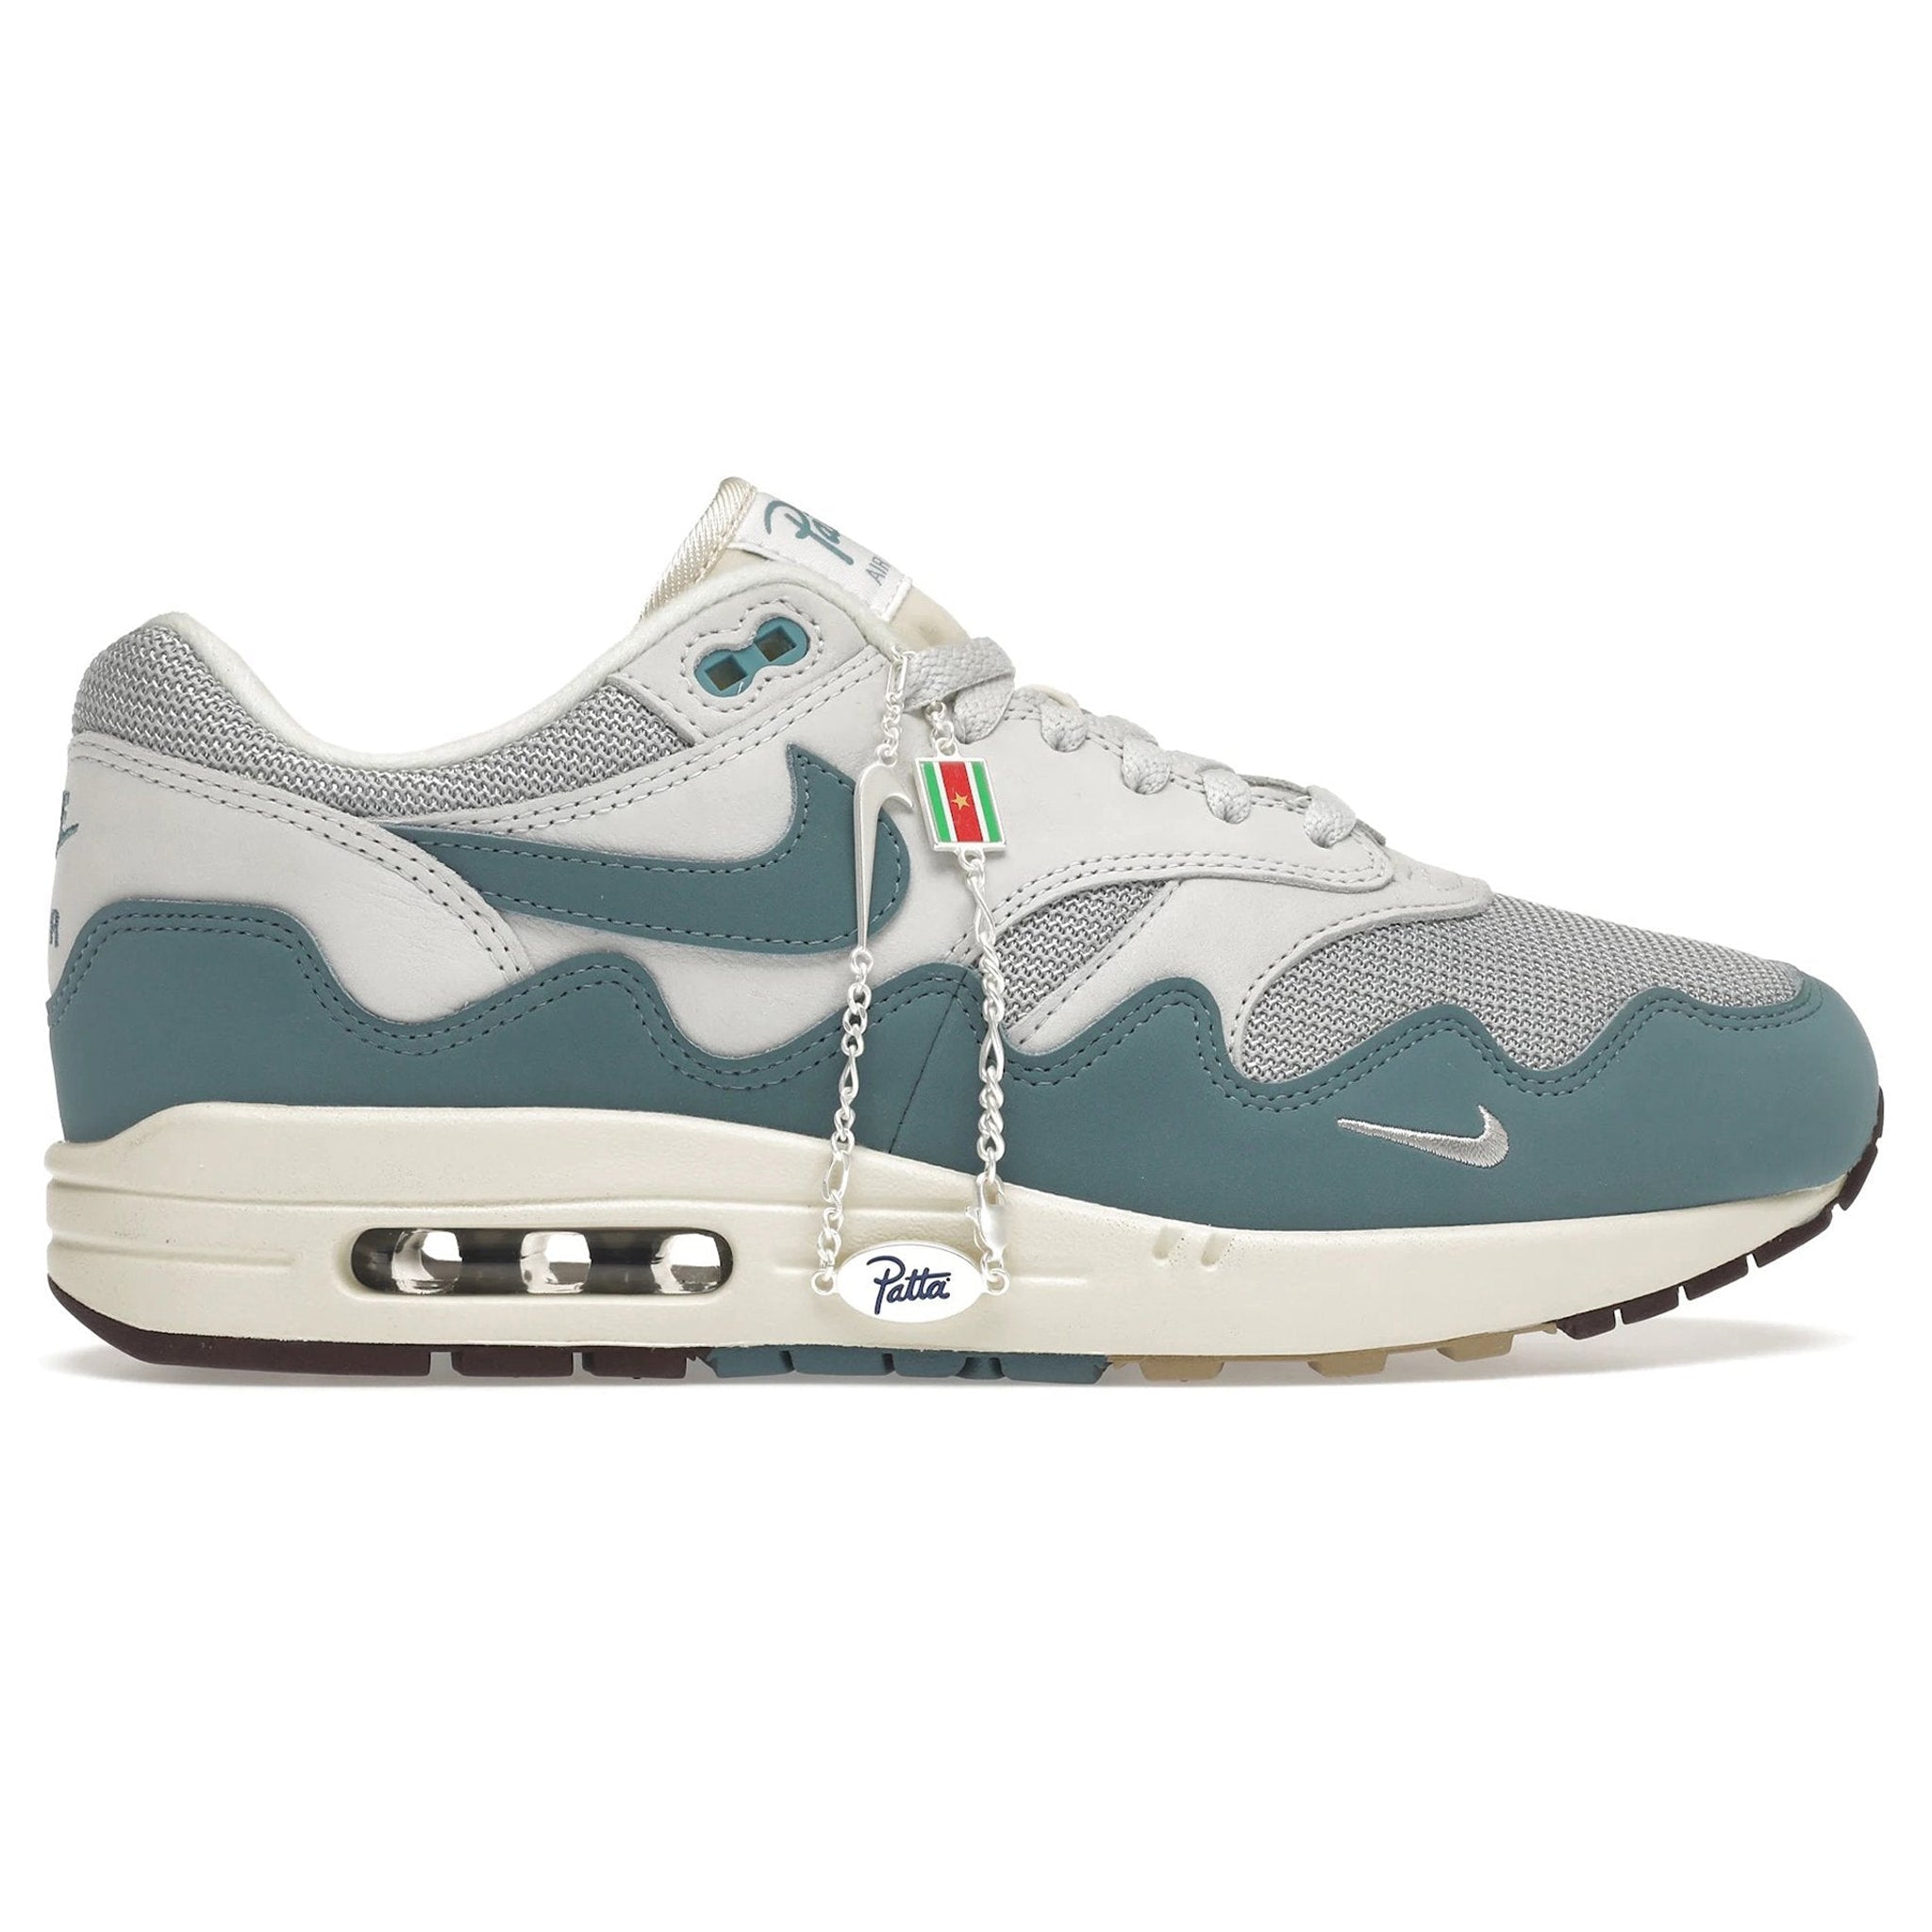 Image of Nike Air Max 1 Patta Waves Noise Aqua (With Bracelet)